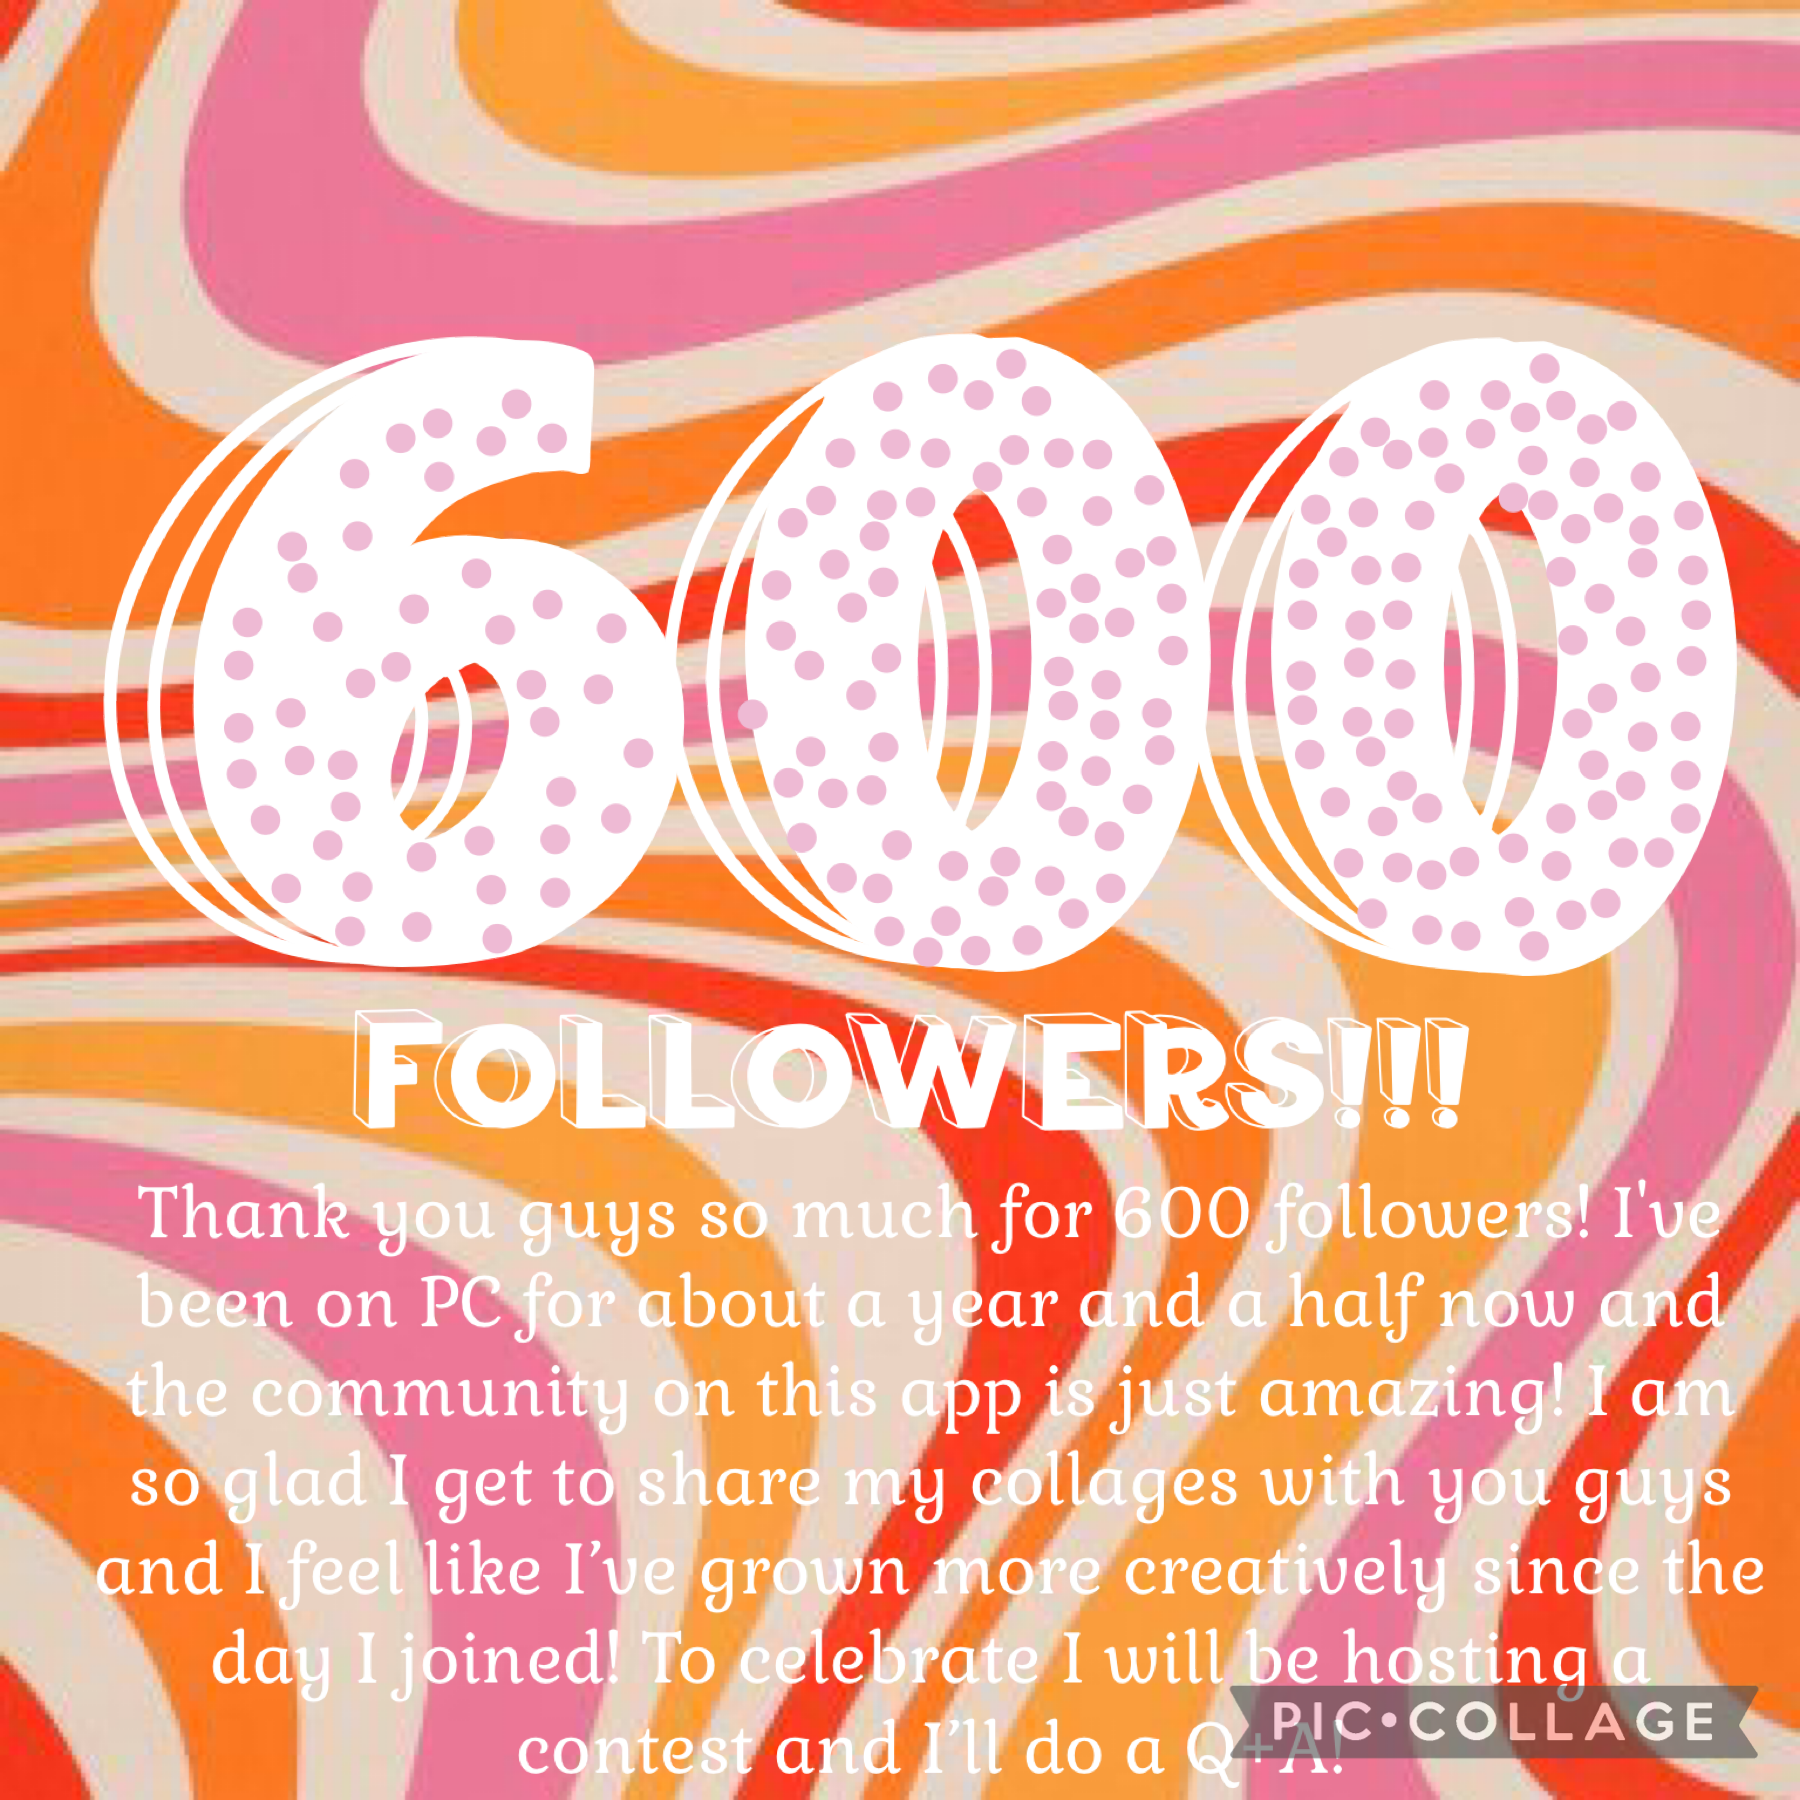 Thank you guys sooo much for 600!!

I’ll have a contest posted in a few hours!